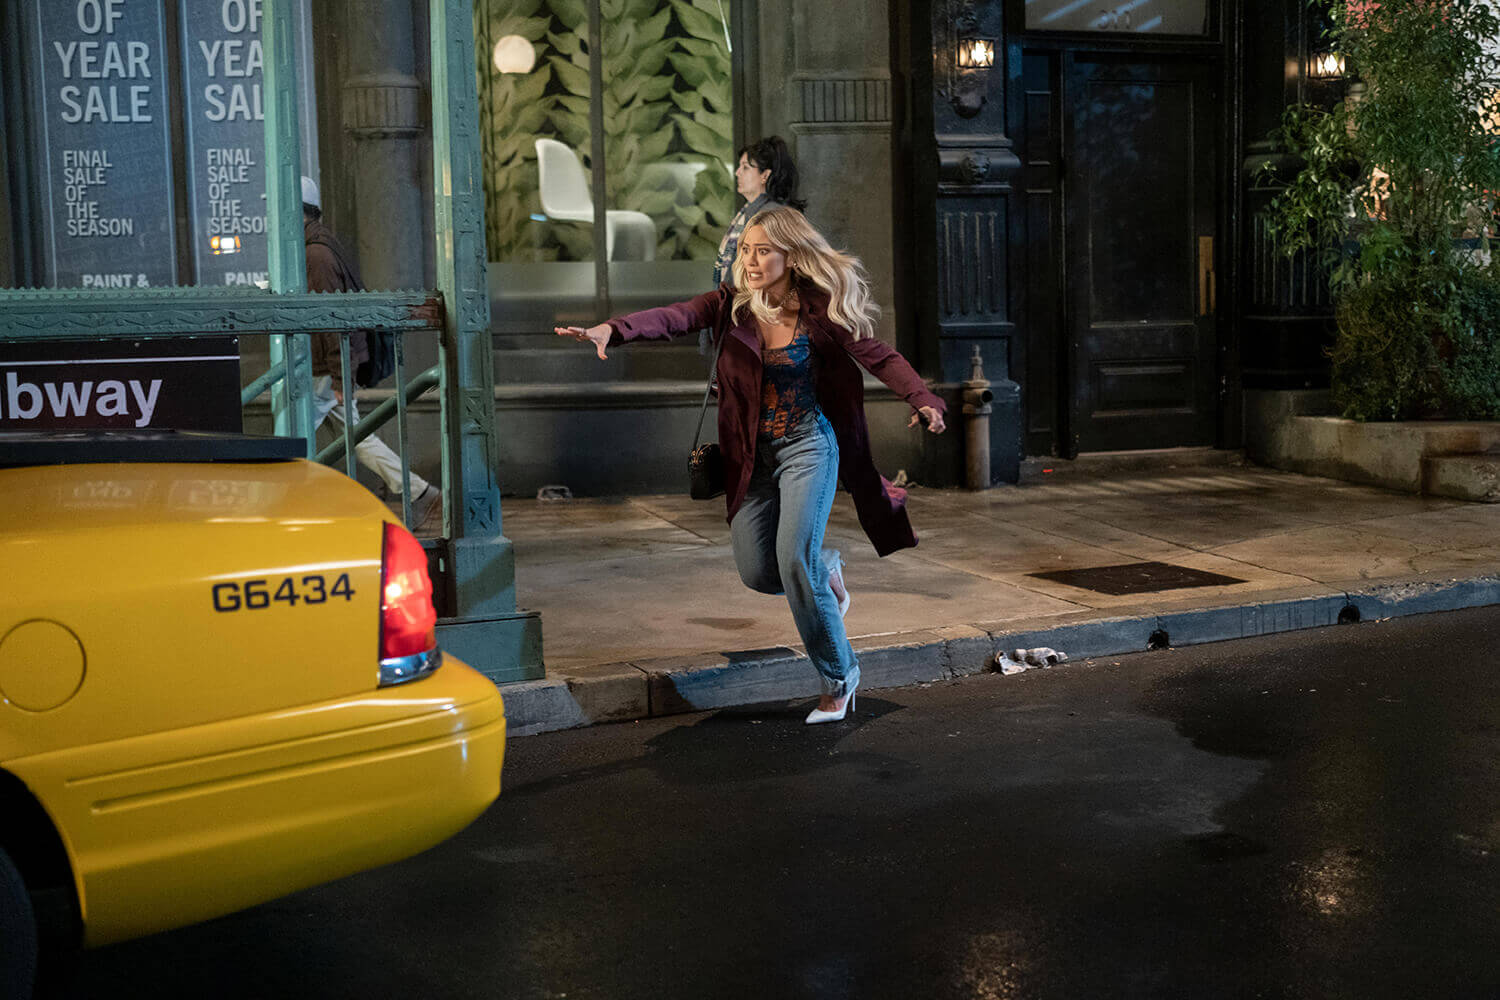 How I Met Your Father: Hilary Duff as Sophie chasing a taxi that drives away with her photo on the back hood.